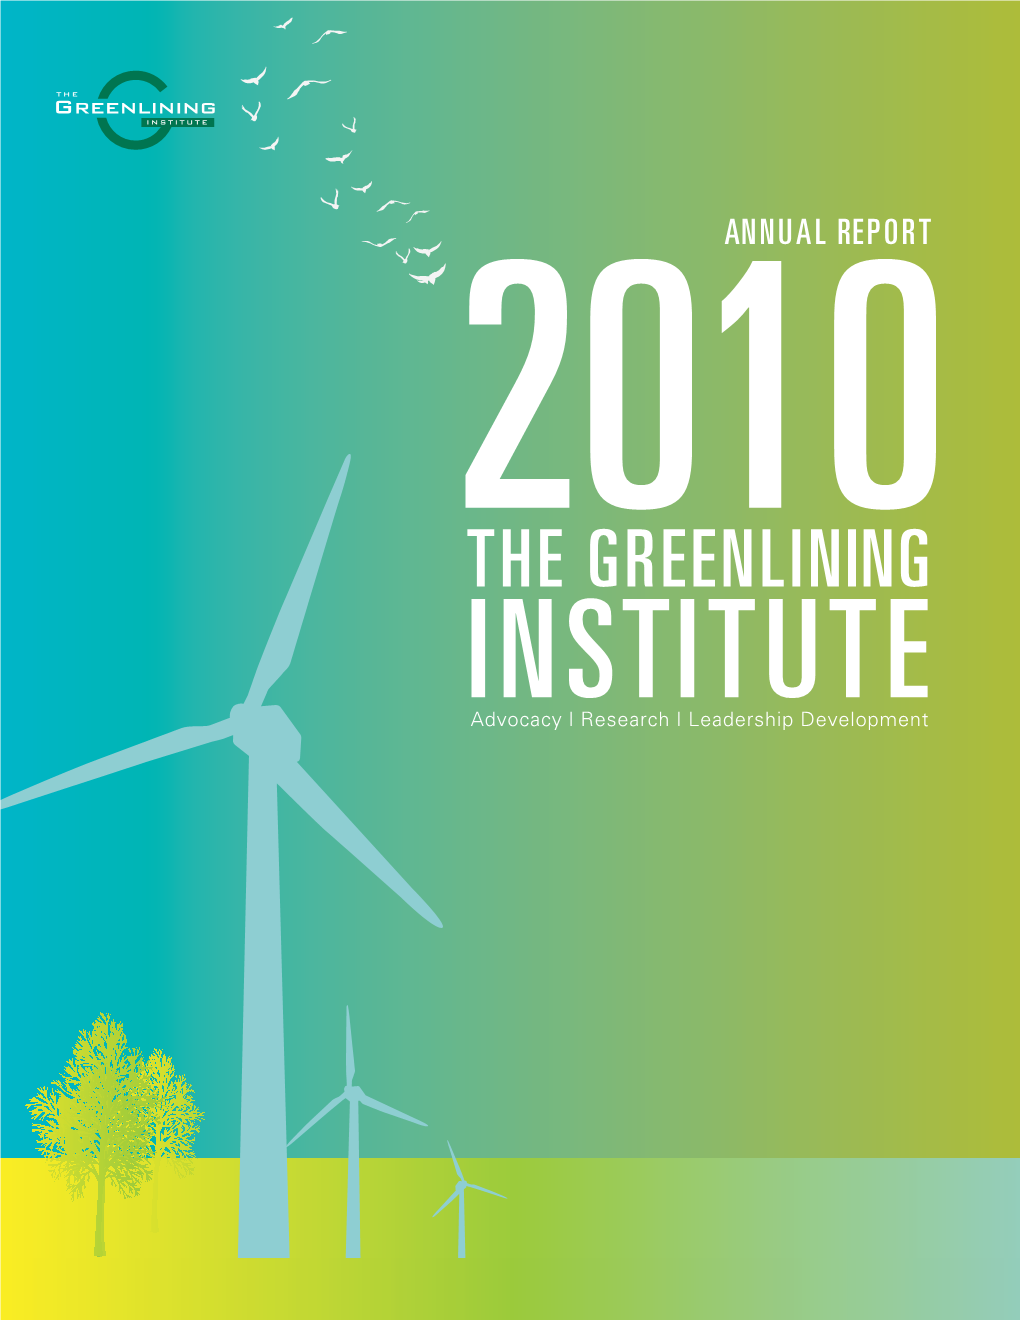 THE GREENLINING INSTITUTE Advocacy | Research | Leadership Development the GREENLINING INSTITUTE Annual Report 2010